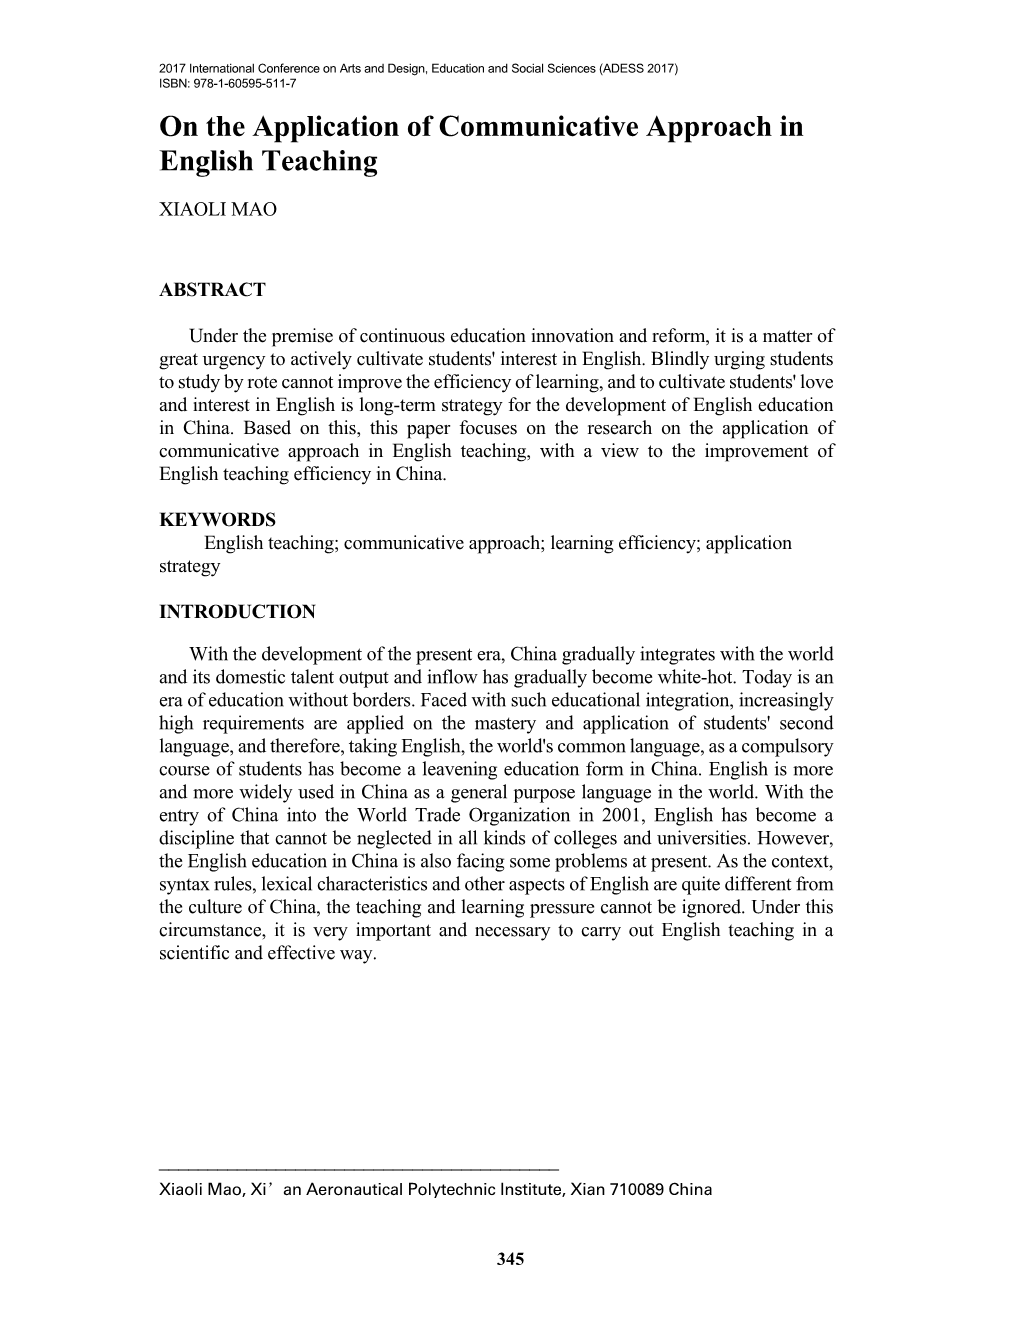 On the Application of Communicative Approach in English Teaching